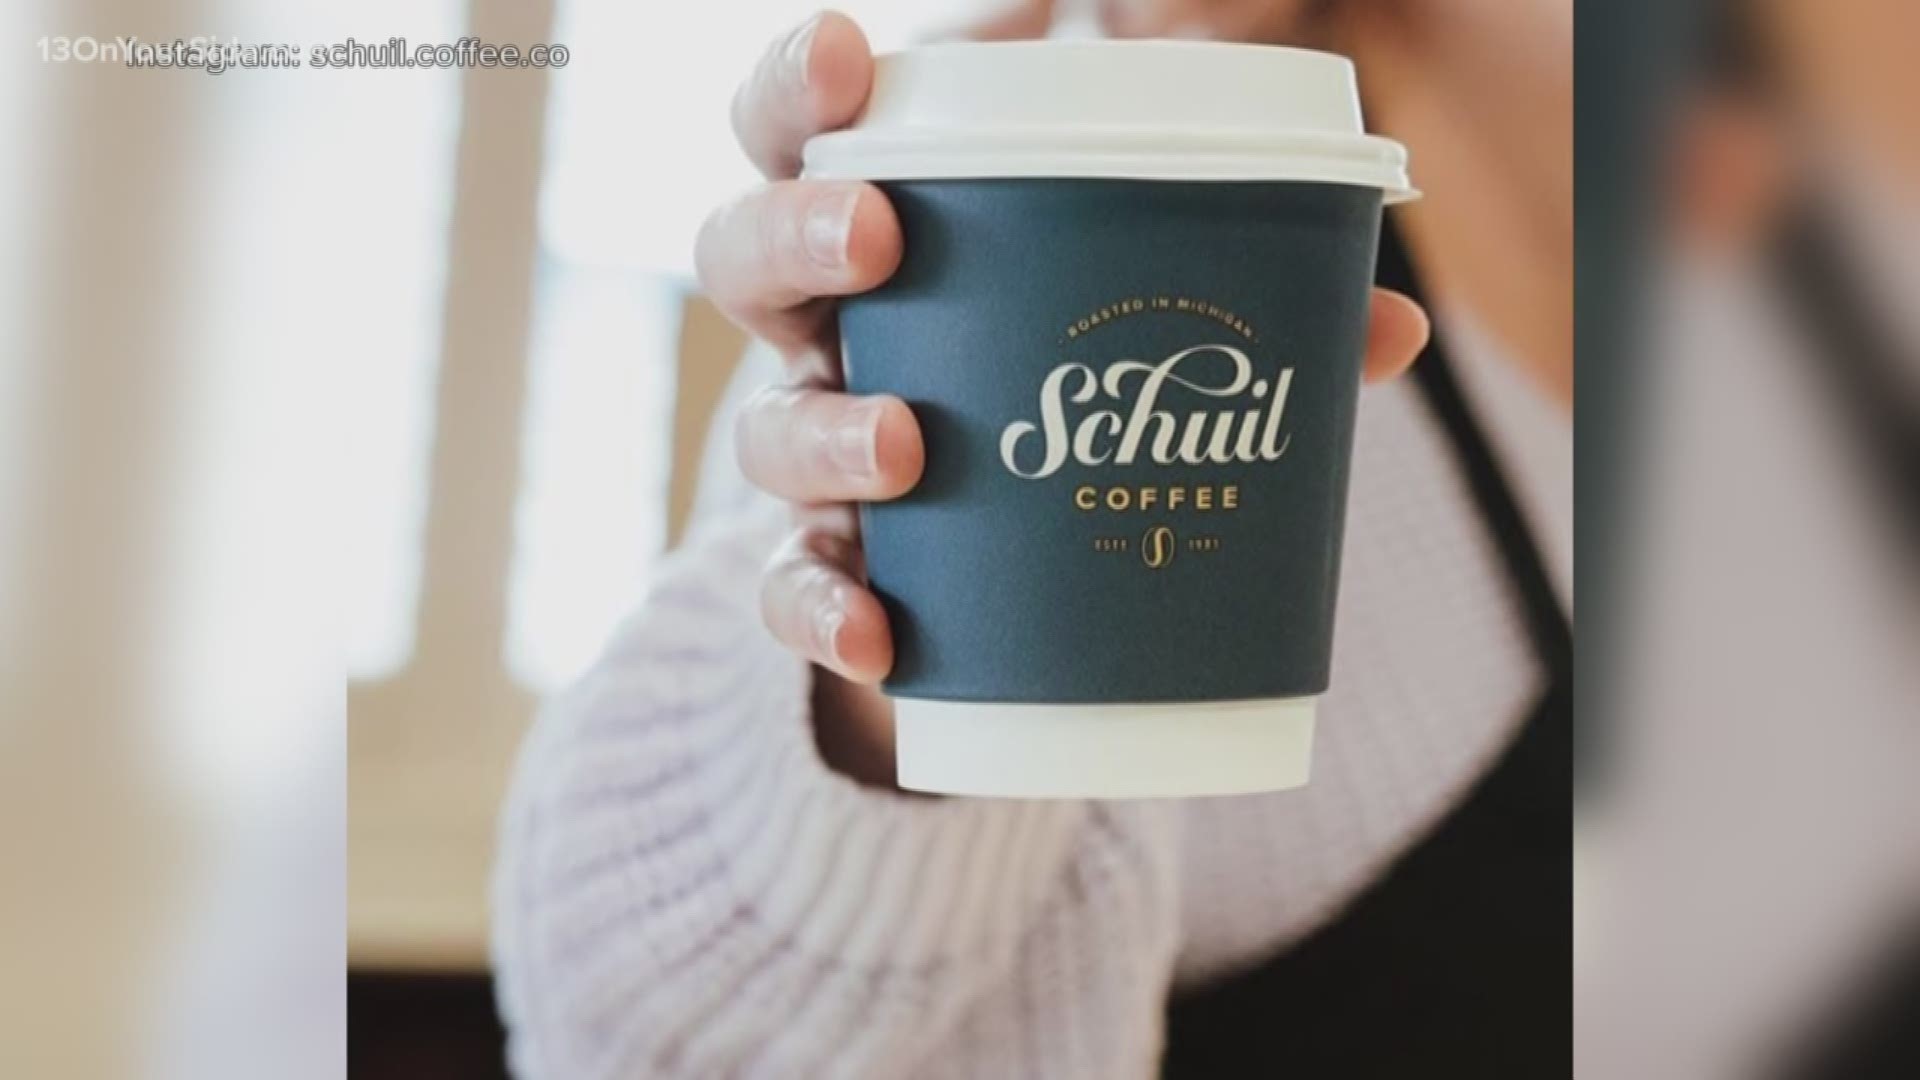 Schuil Coffee Company is partnering with Wedgwood Christian Services to pilot a new fundraising program. Schuil has created three coffee blends whose sales will support the nonprofit.